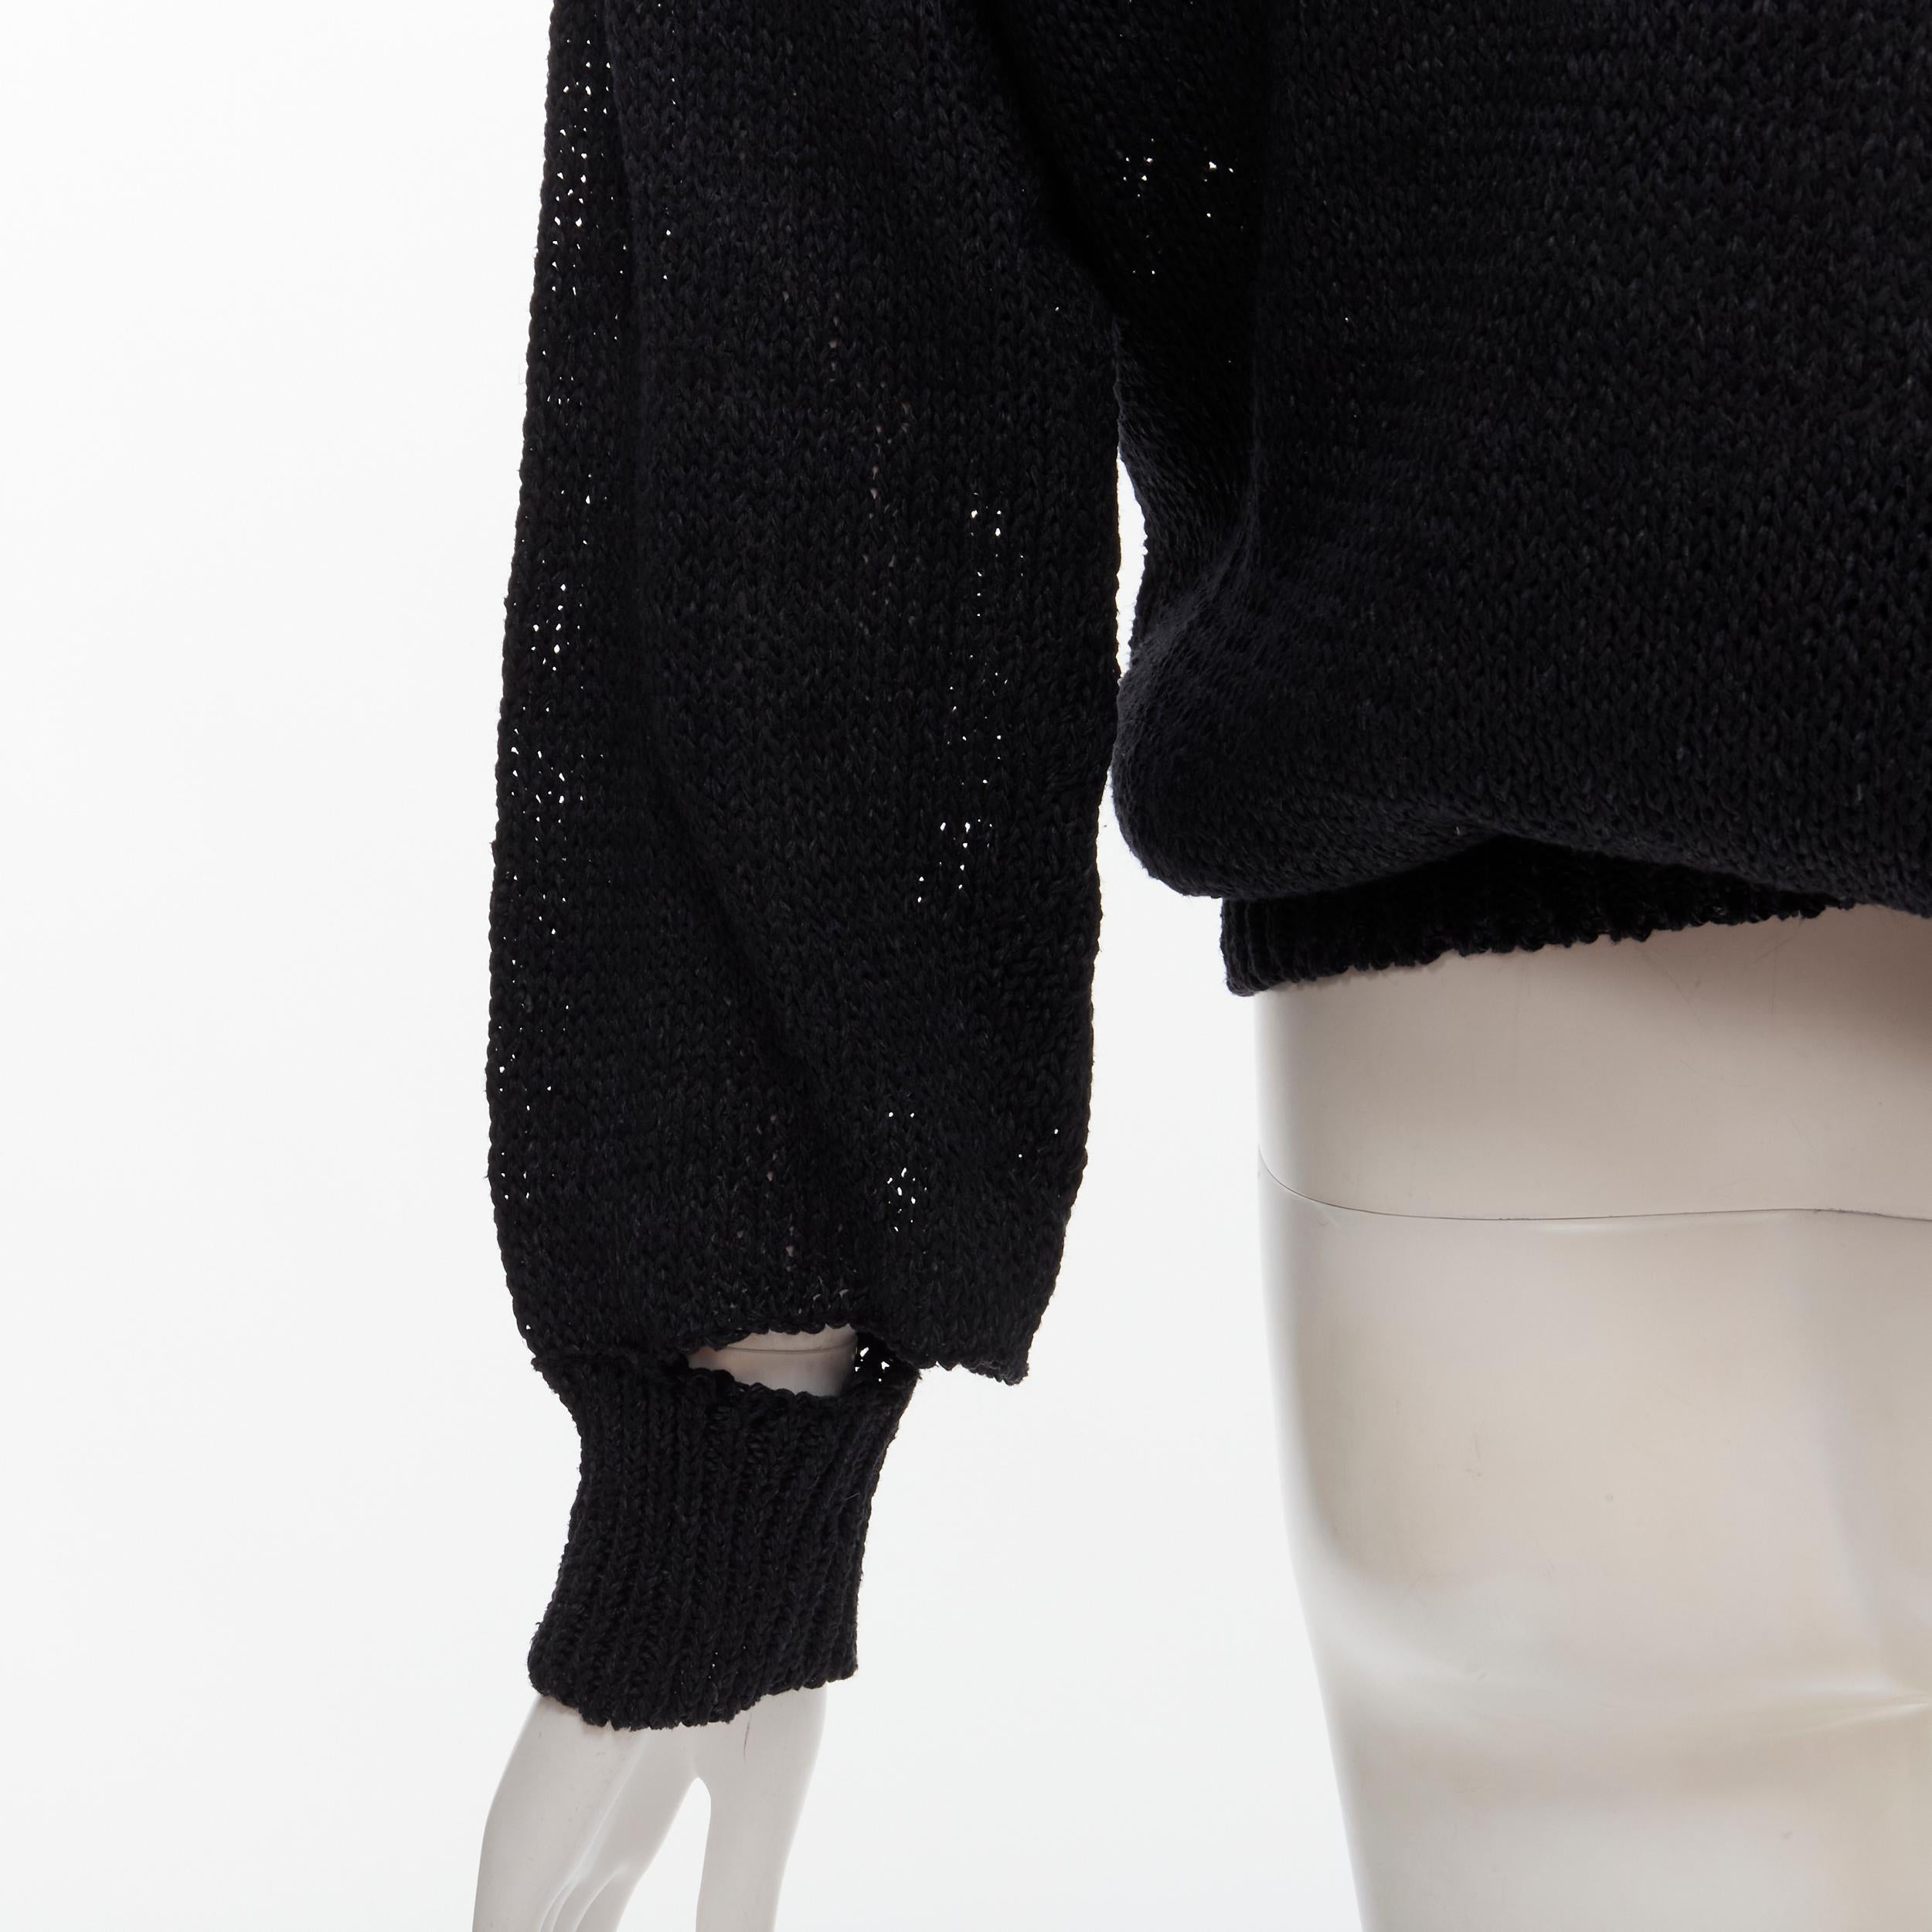 COMME DES GARCONS 1980's Vintage black coated deconstructed hem sweater M 
Reference: CRTI/A00675 
Brand: Comme Des Garcons 
Designer: Rei Kawakubo 
Collection: 1980s 
Material: Cotton 
Color: Black 
Pattern: Solid 
Extra Detail: Deconstructed